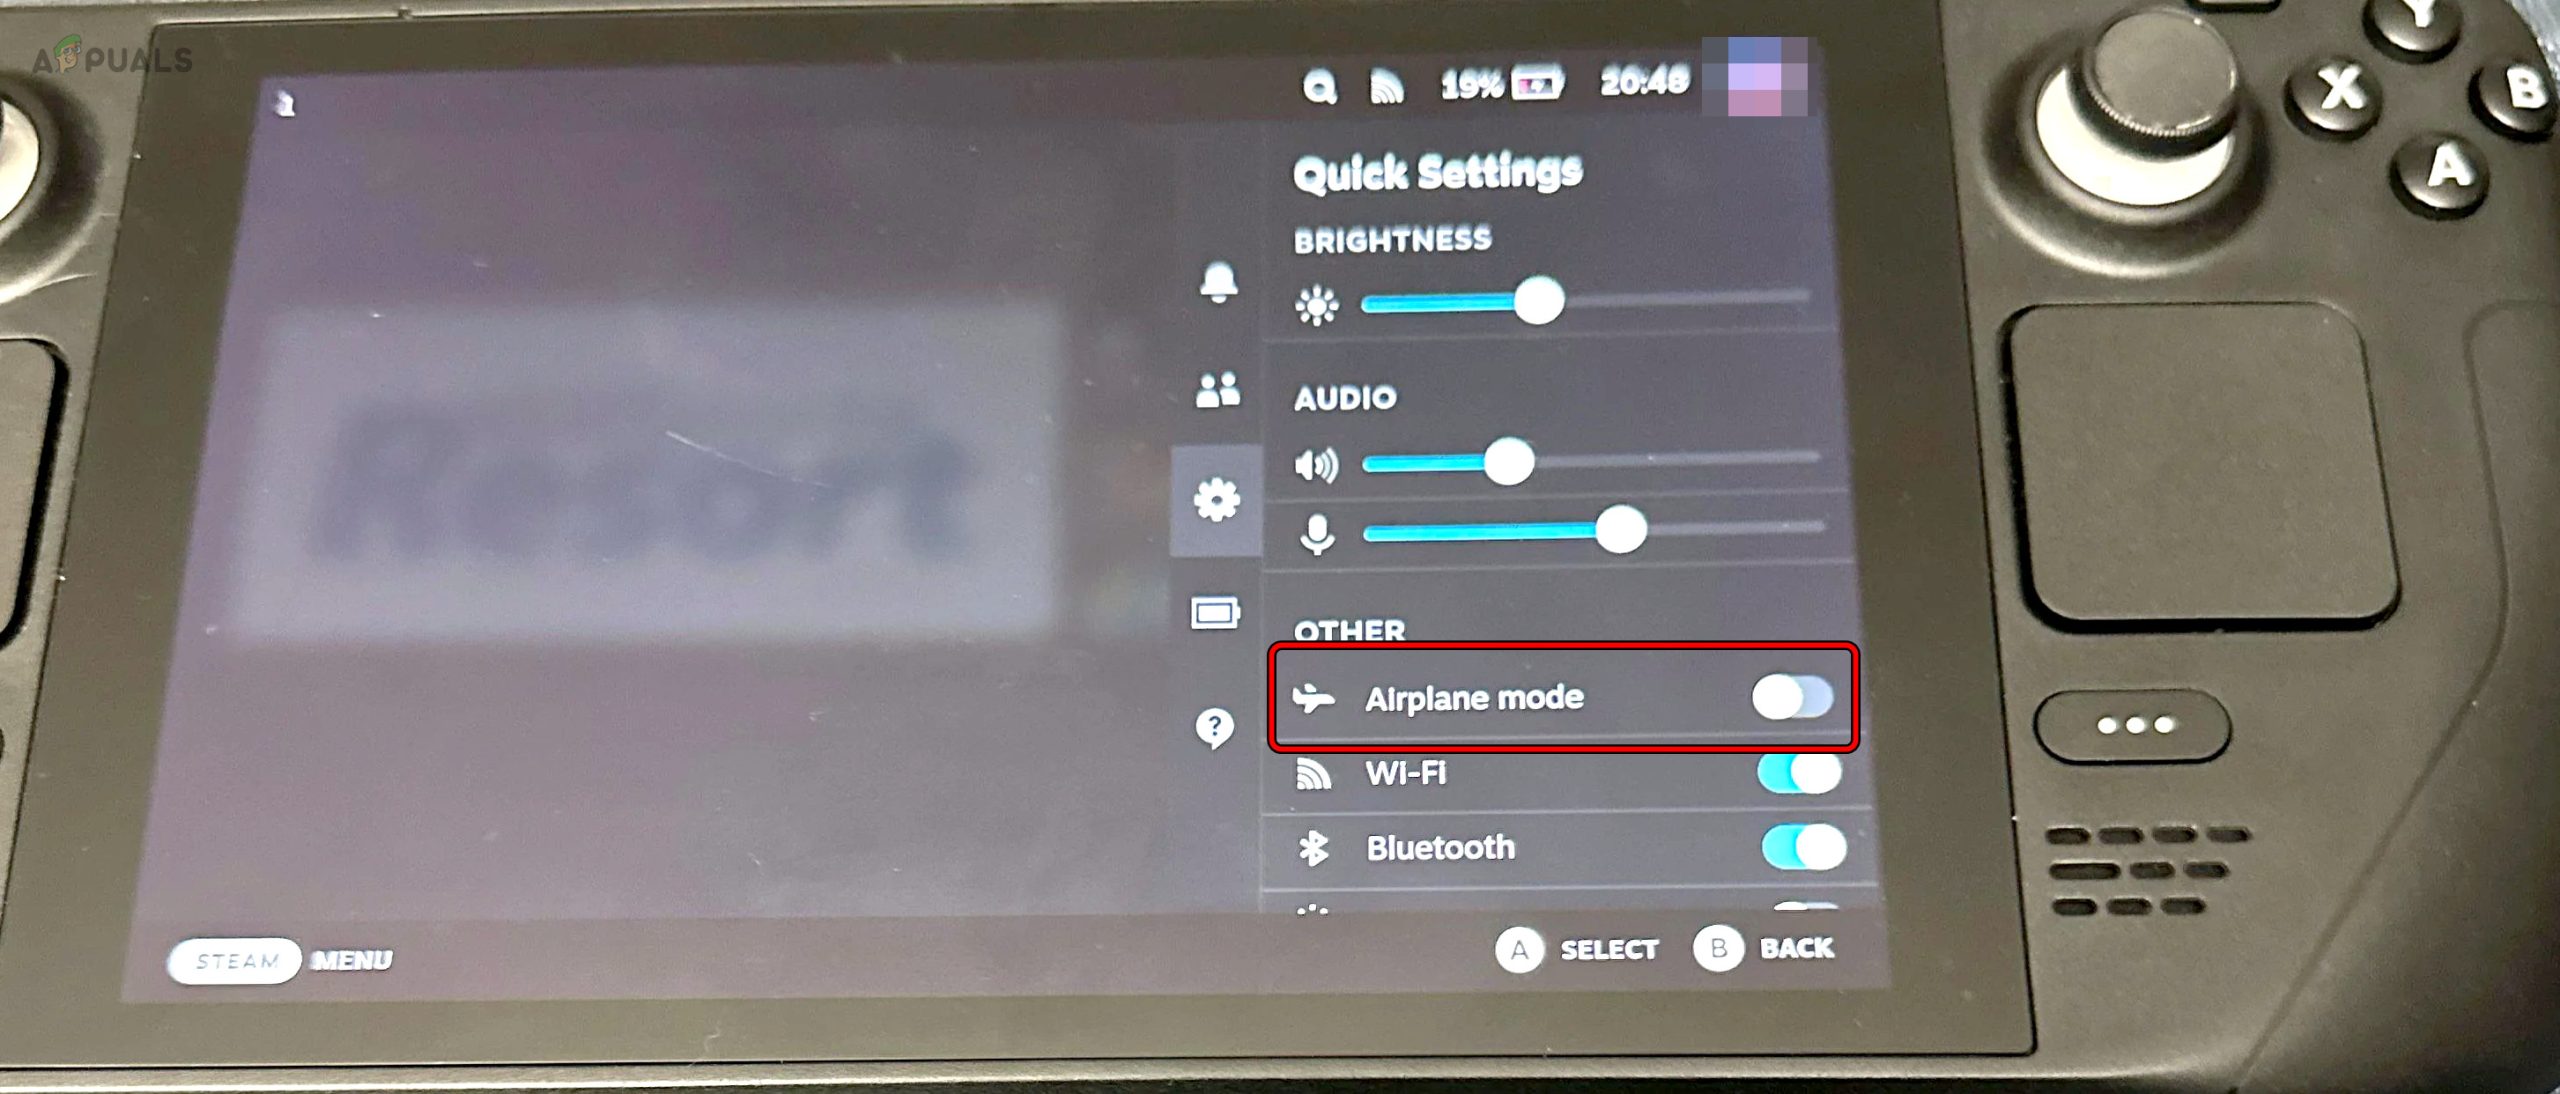 Enable Airplane Mode on the Steam Deck